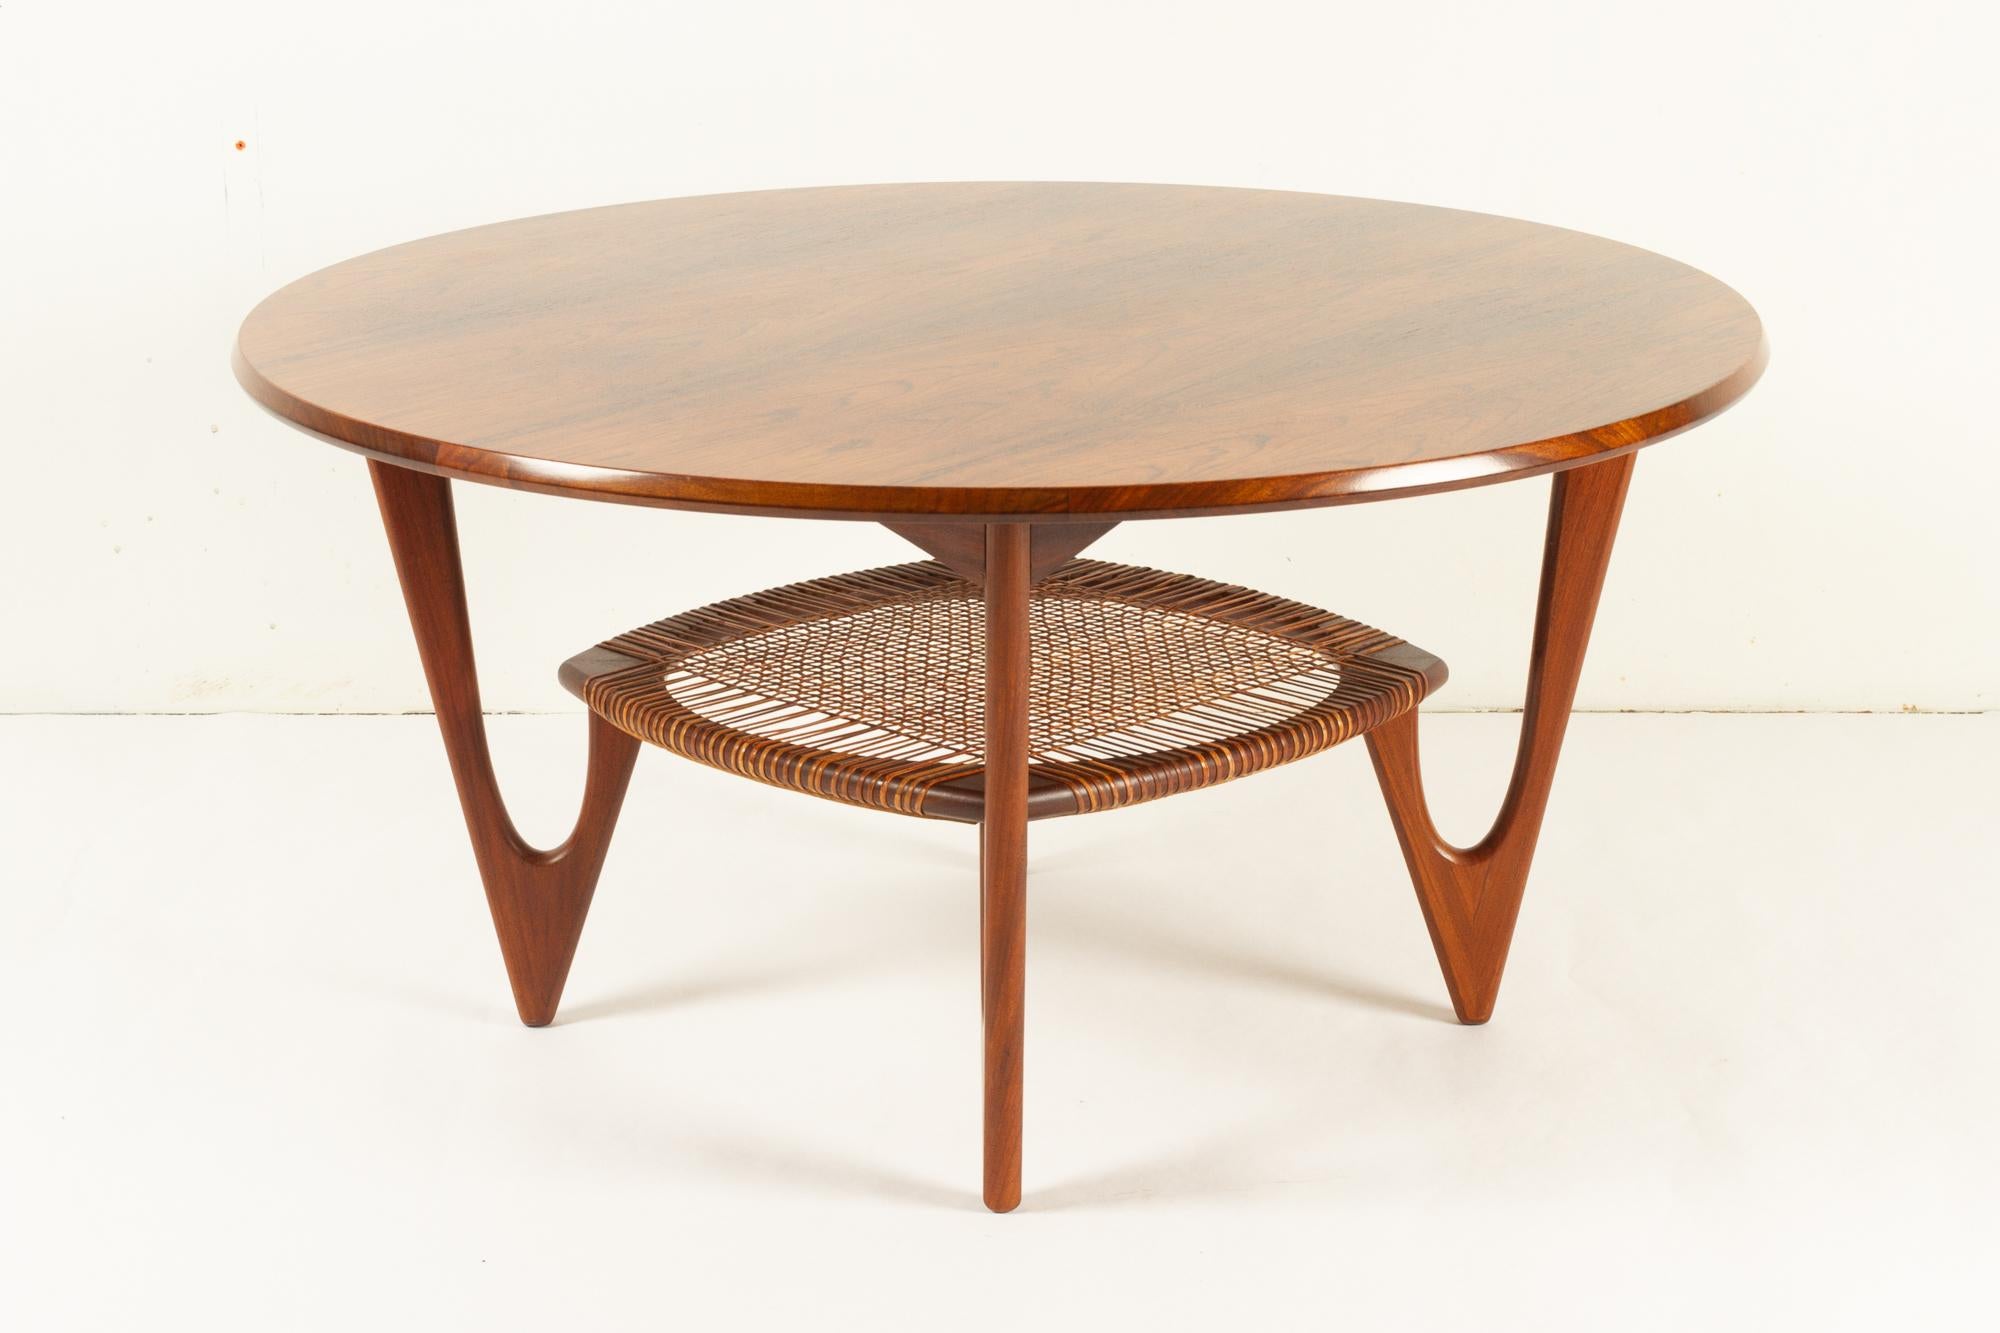 Vintage Danish rosewood coffee table by Kurt Østervig for Jason Møbler, 1950s.
Rare and elegant Mid-Century Modern round coffee table with cane shelf. Sculpted V-shaped legs in dark solid teak. Designed by renowned Danish architect Kurt Østervig in